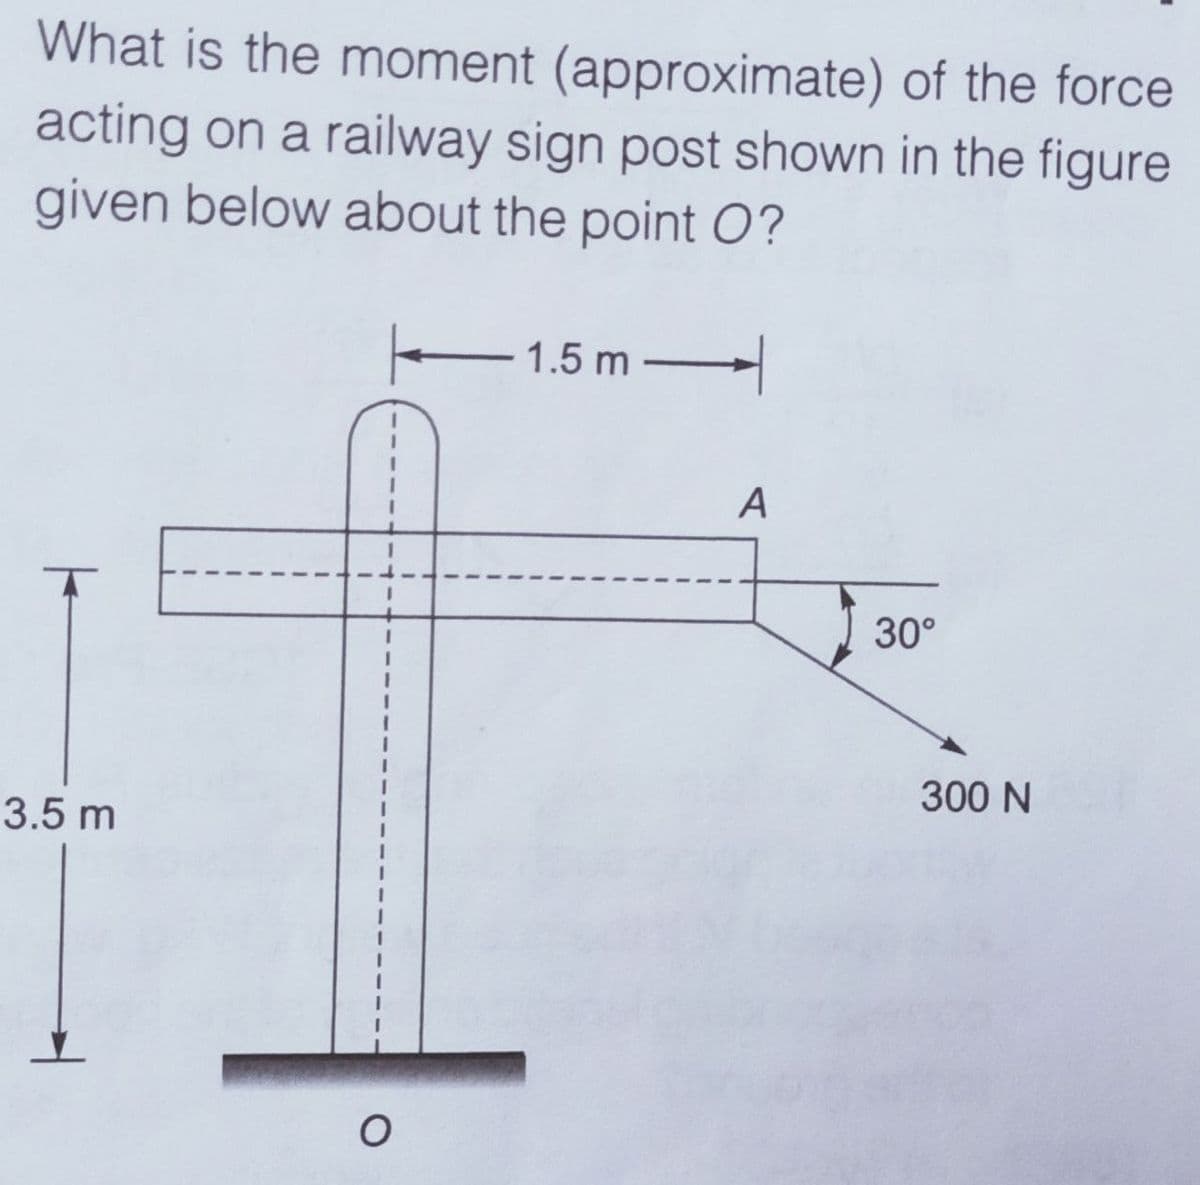 What is the moment (approximate) of the force
acting on a railway sign post shown in the figure
given below about the point O?
1.5 m
A
30°
300 N
3.5 m
